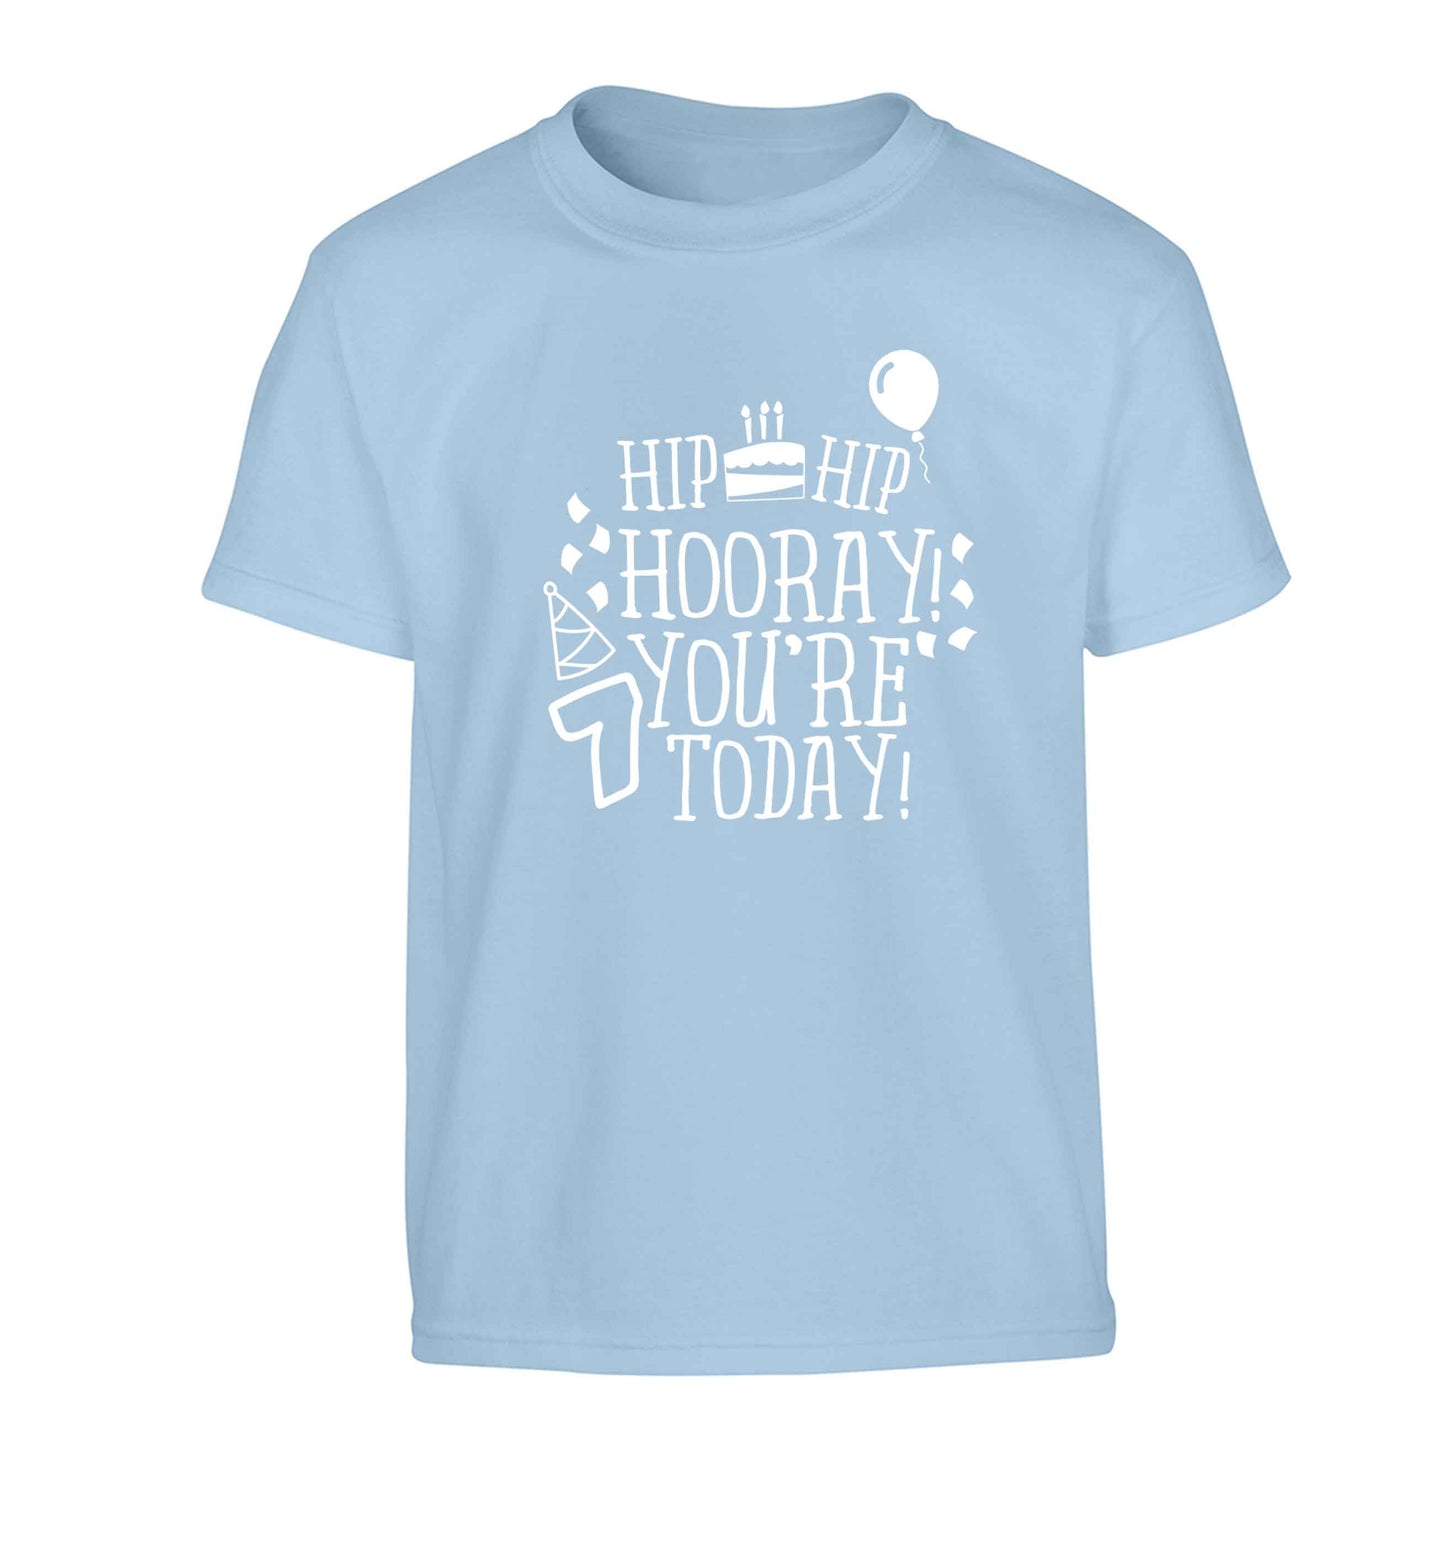 Hip hip hooray you're seven today! Children's light blue Tshirt 12-13 Years